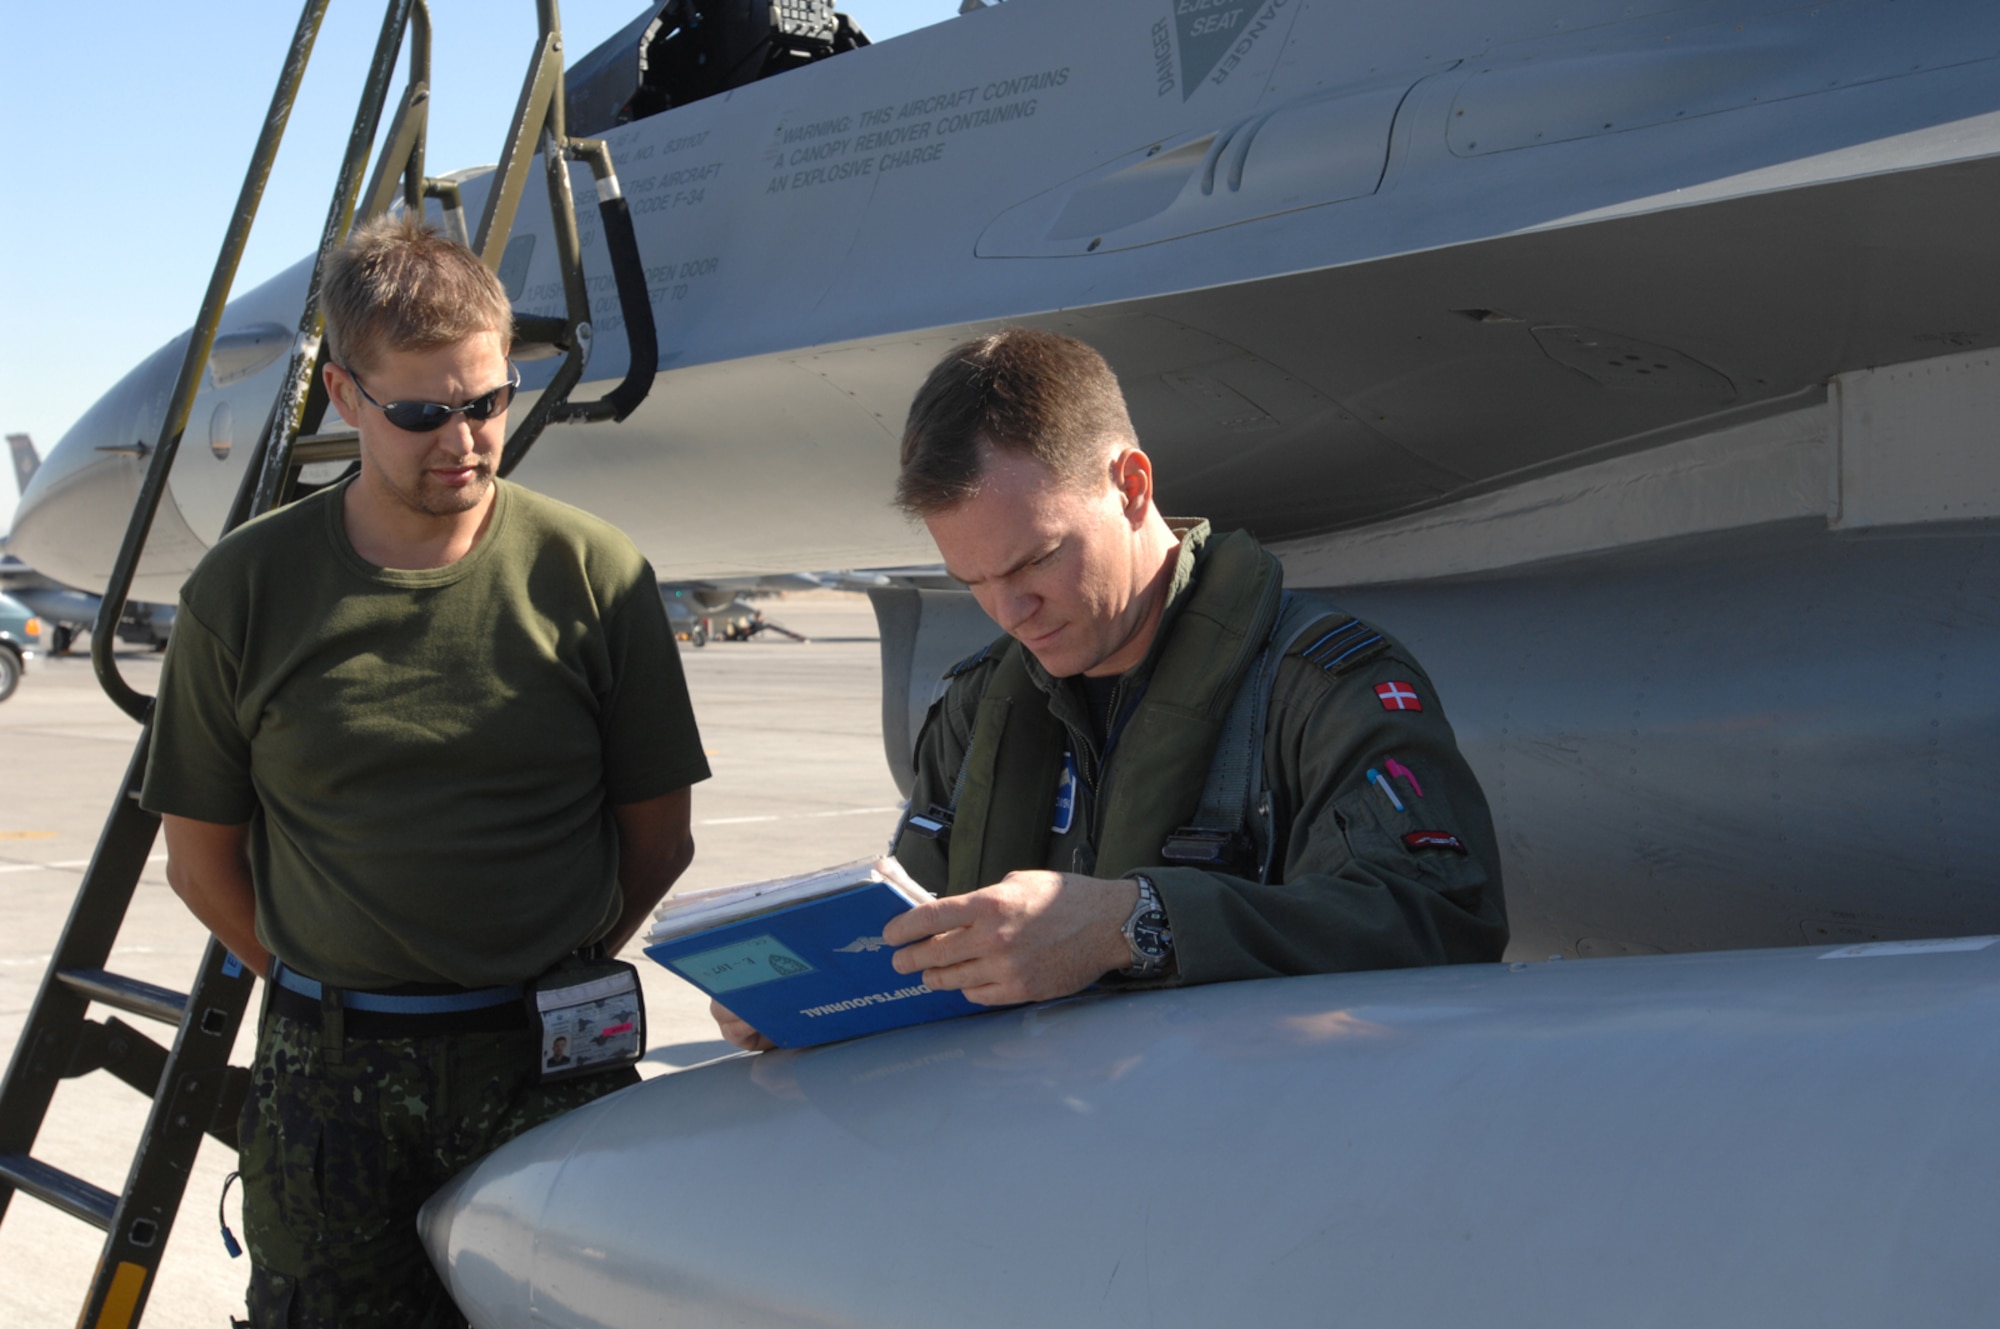 Danish air force Capt. Eric Scharnowski reviews the preflight checklist as Lance Cpl. Stig Clausen waits for instructions prior to a Red Flag sortie. Red Flag tests aircrews’ war-fighting skills in realistic combat situations. (USAF photo by Staff Sgt. Kenny Kennemer)